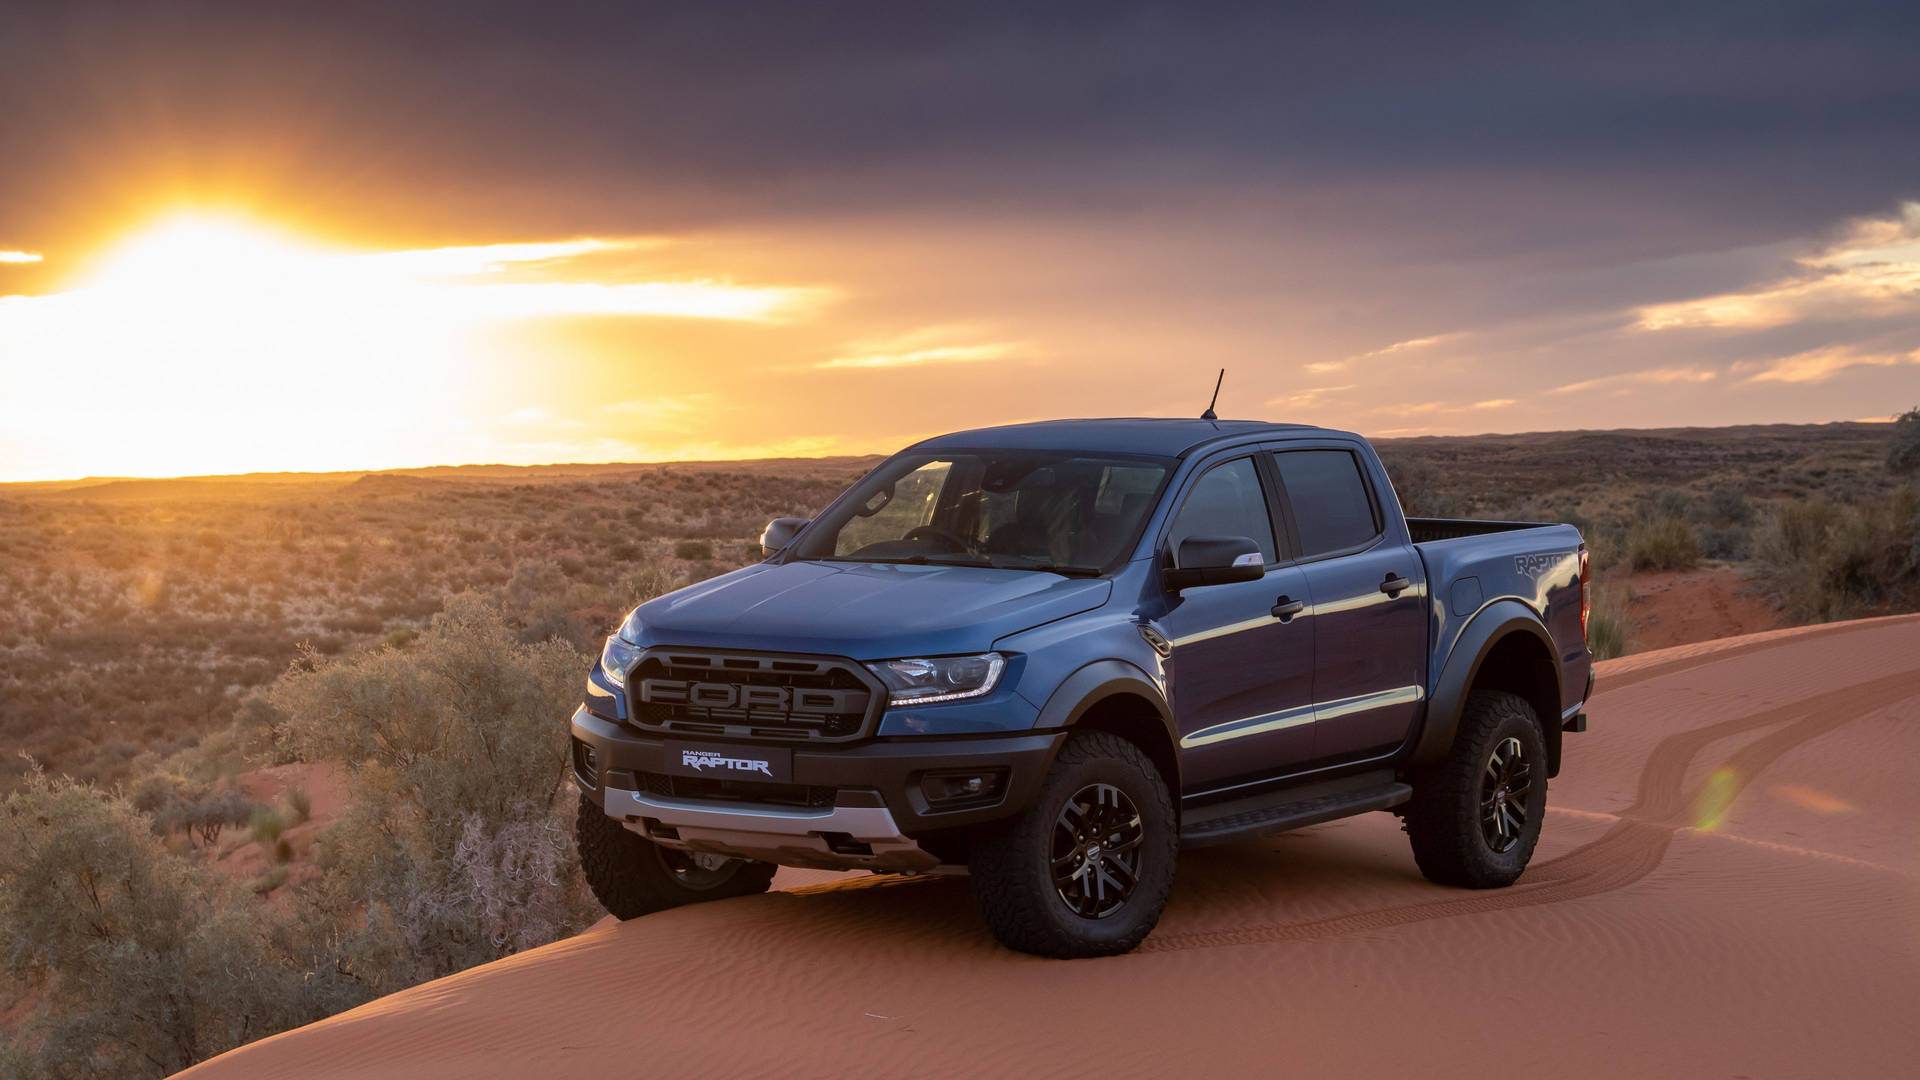 Ford Raptor With Sunset View